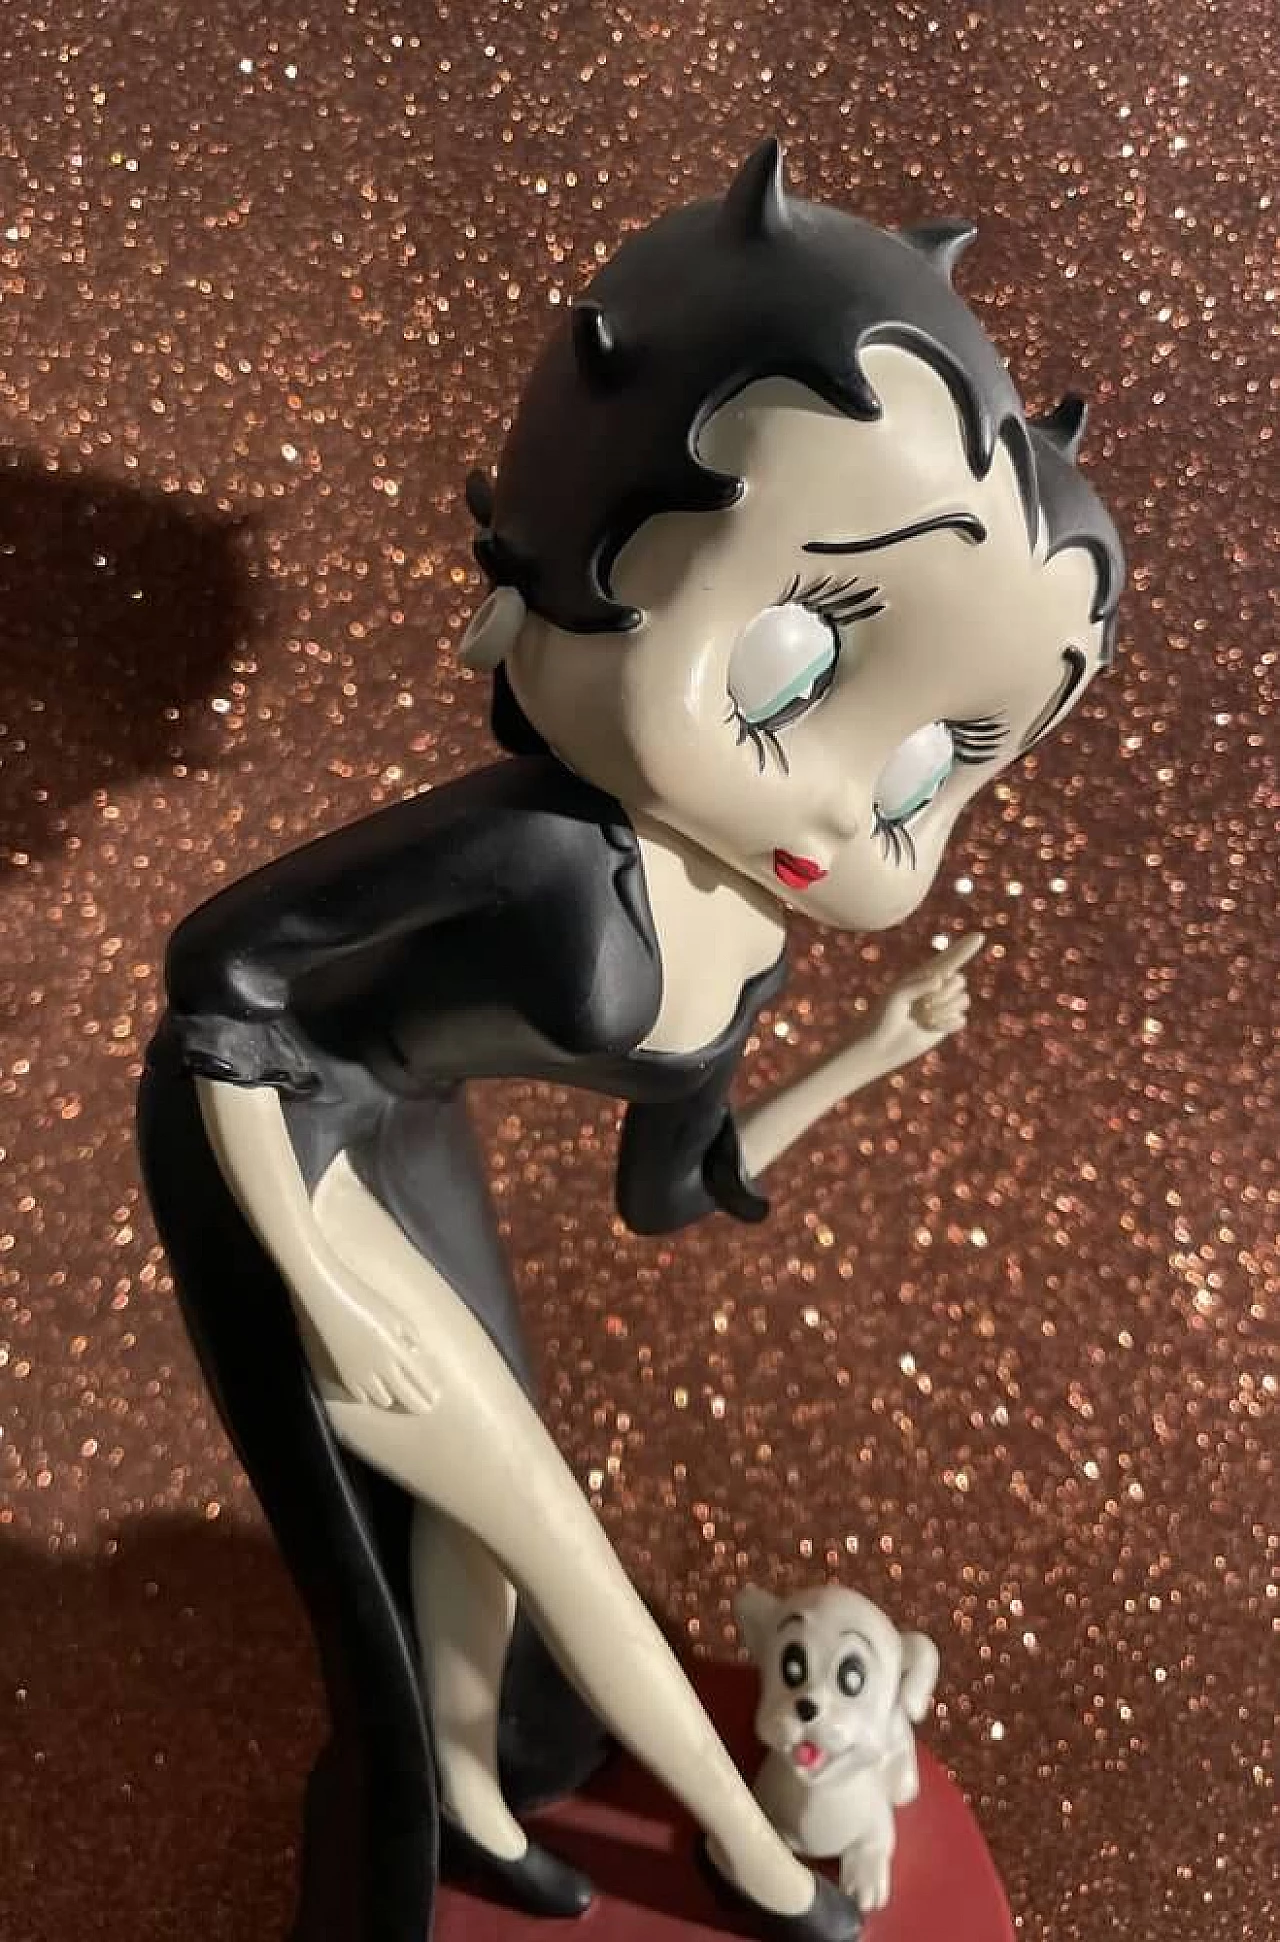 Betty Boop collectible figurine with black dress and small dog by Fleischer Studios, 2007 3